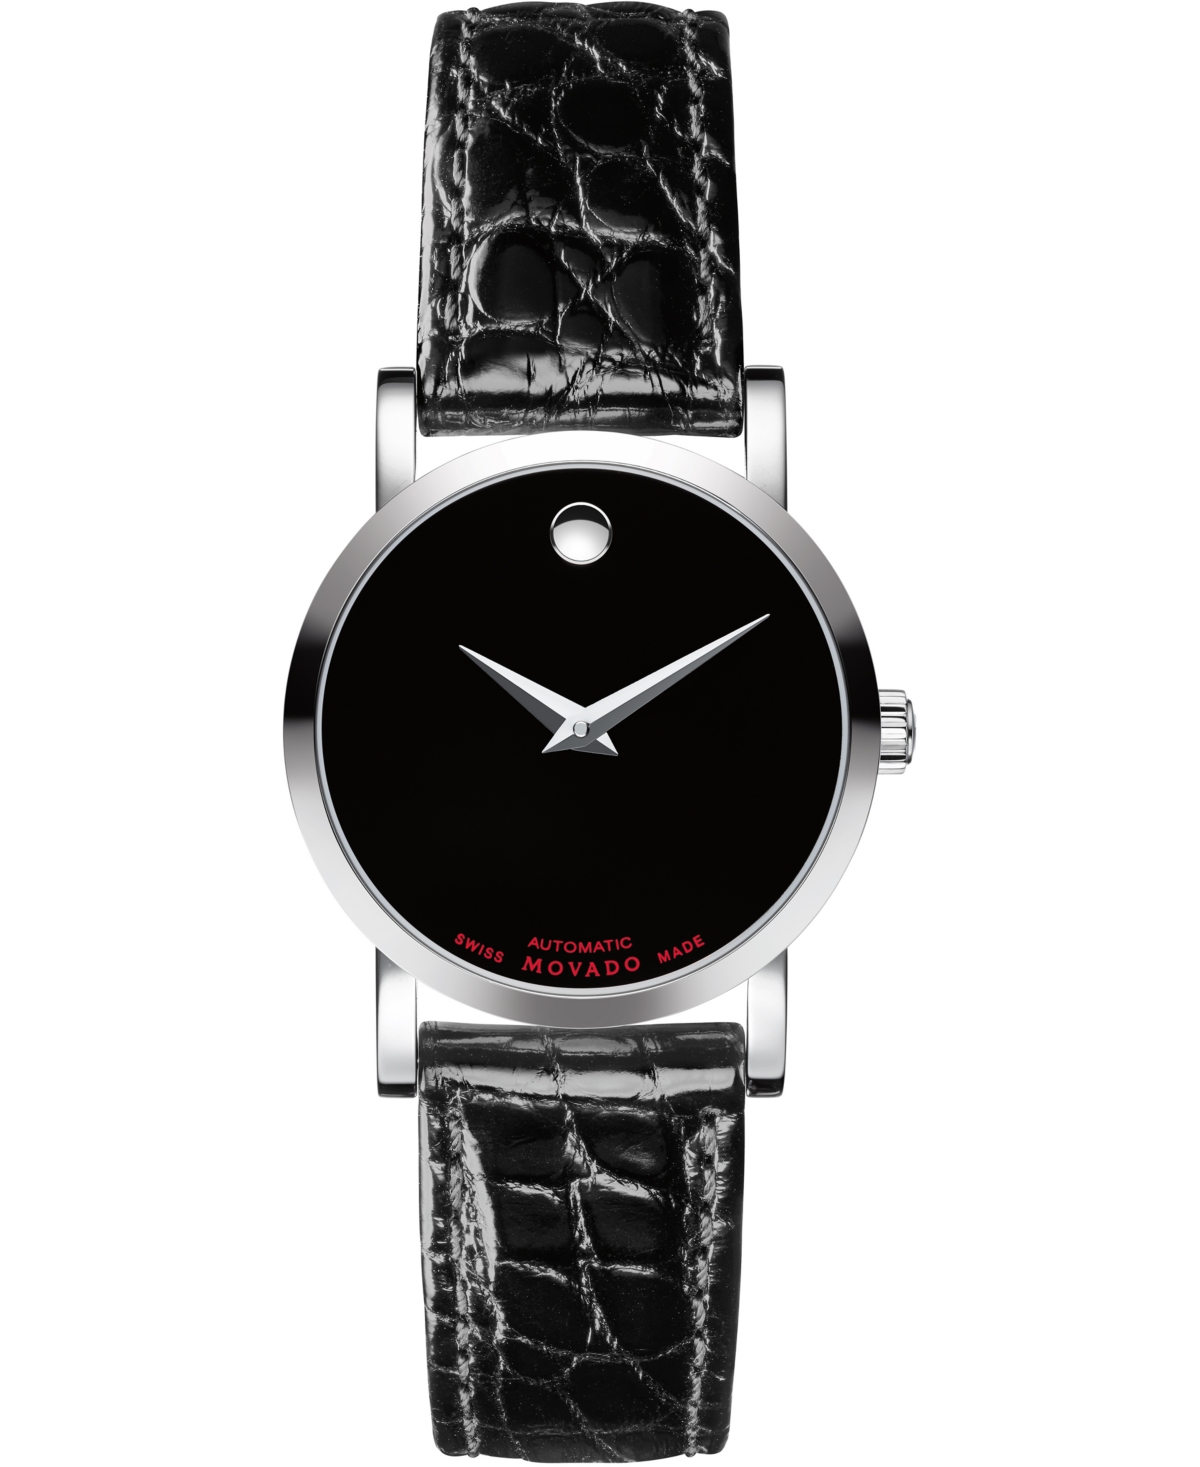 Movado Women's Swiss Automatic Red Label Black Leather Strap Watch 26mm